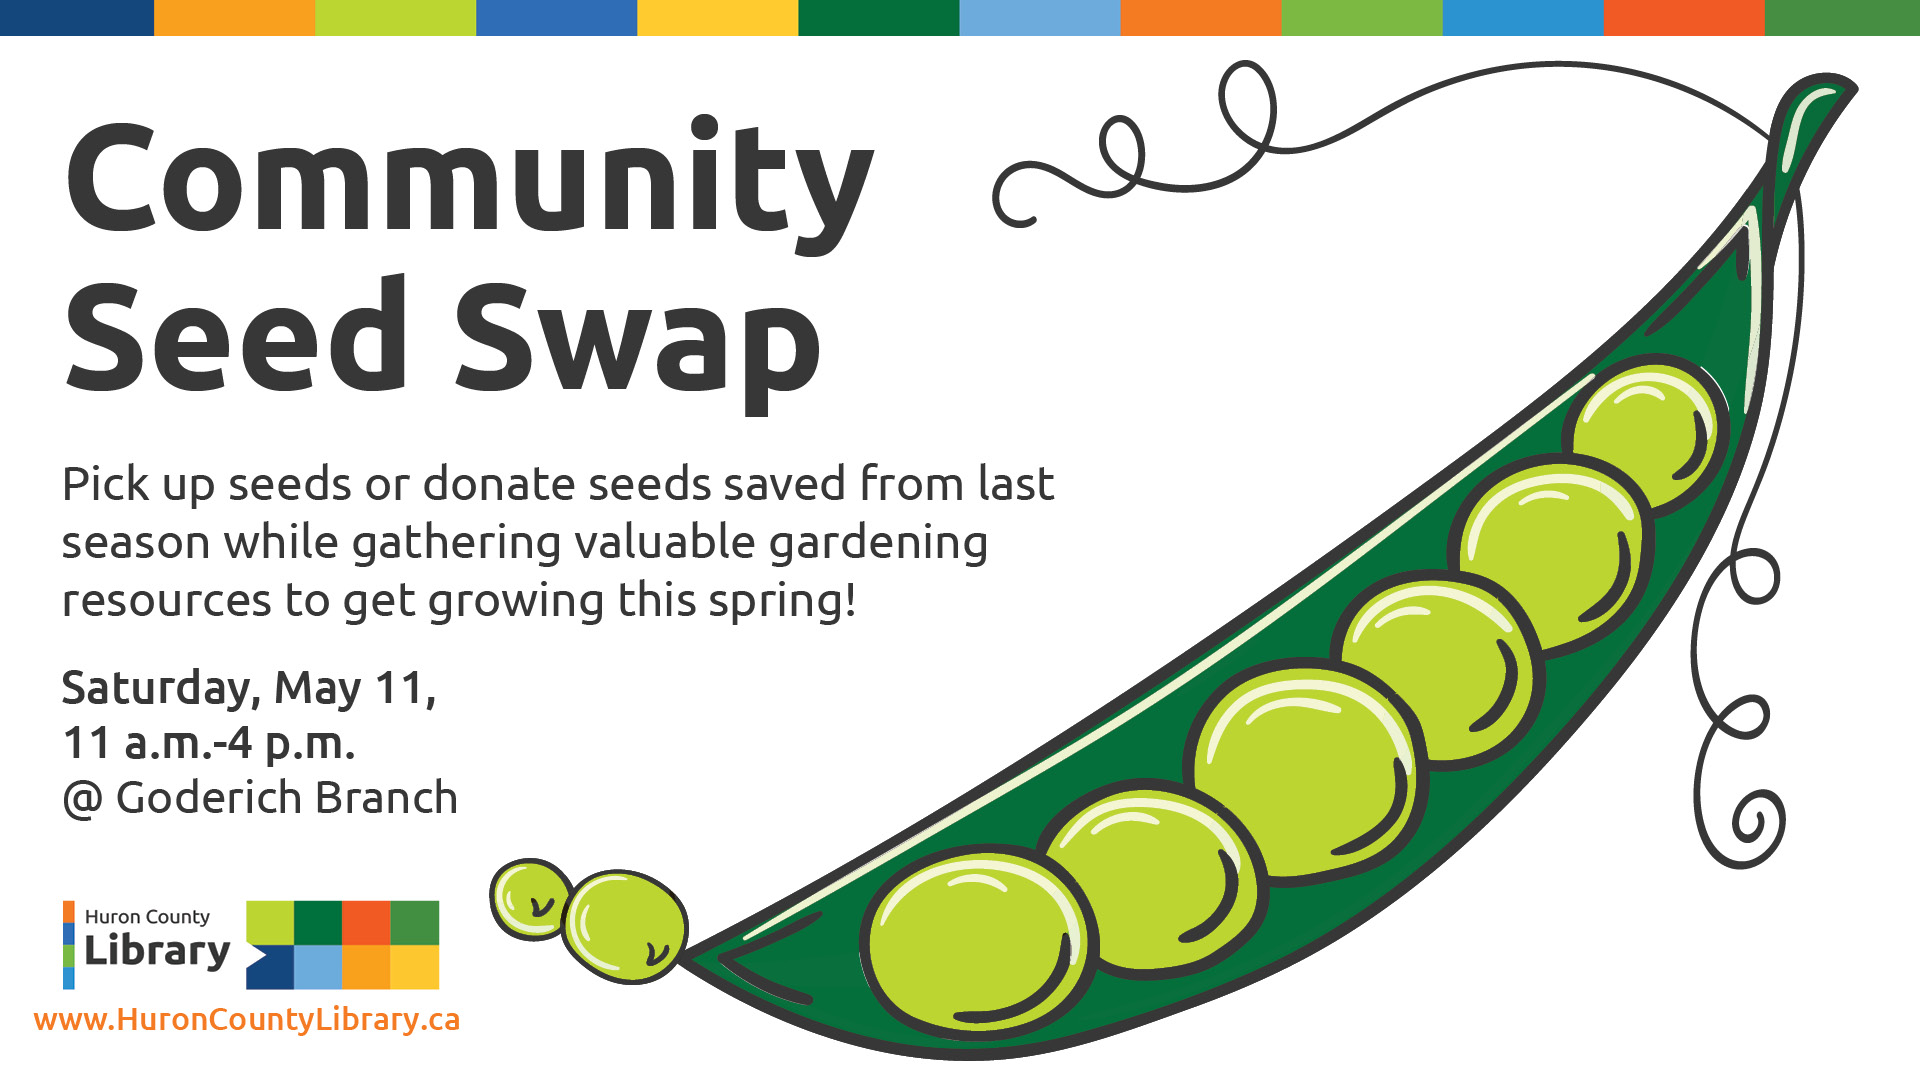 Illustration of peas in a pod with text promoting seed swap at Goderich